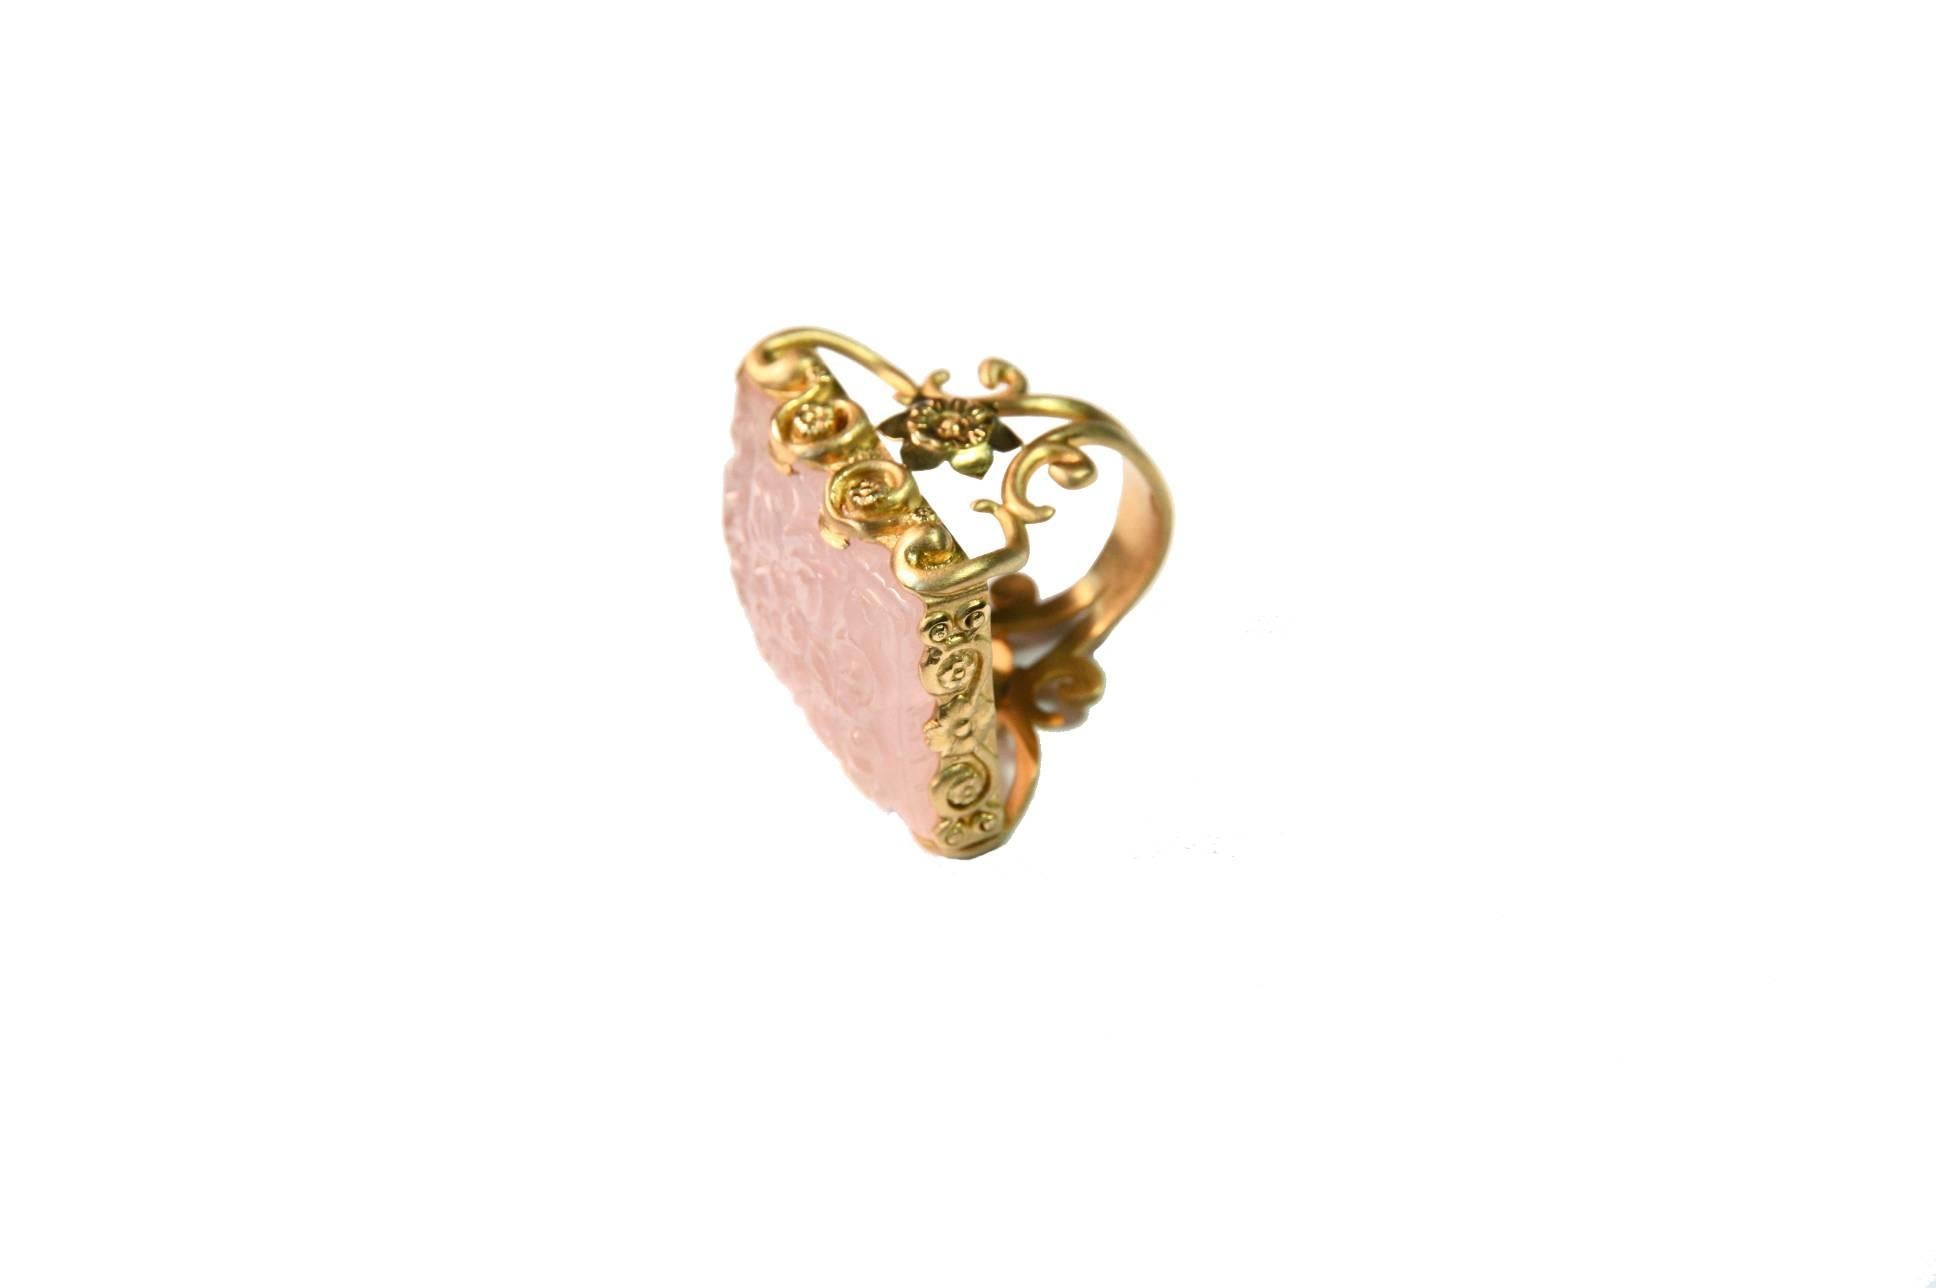 Mixed Cut Carved Rose Quartz Stone 18 Karat Gold Cocktail Ring For Sale